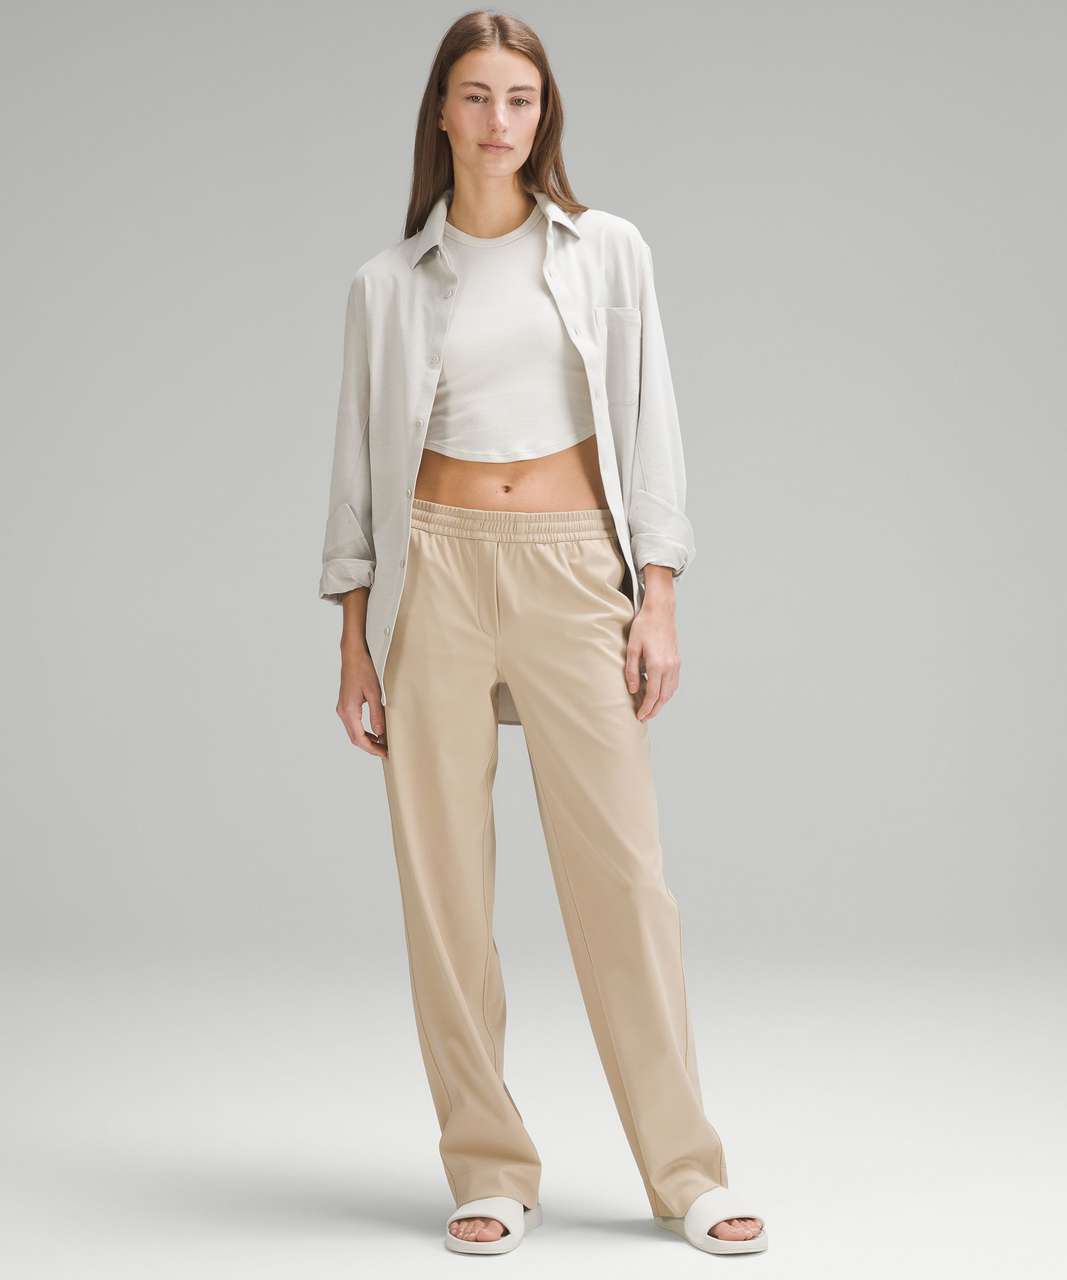 Lululemon Luxtreme Mid-Rise Straight-Leg Trouser - Trench